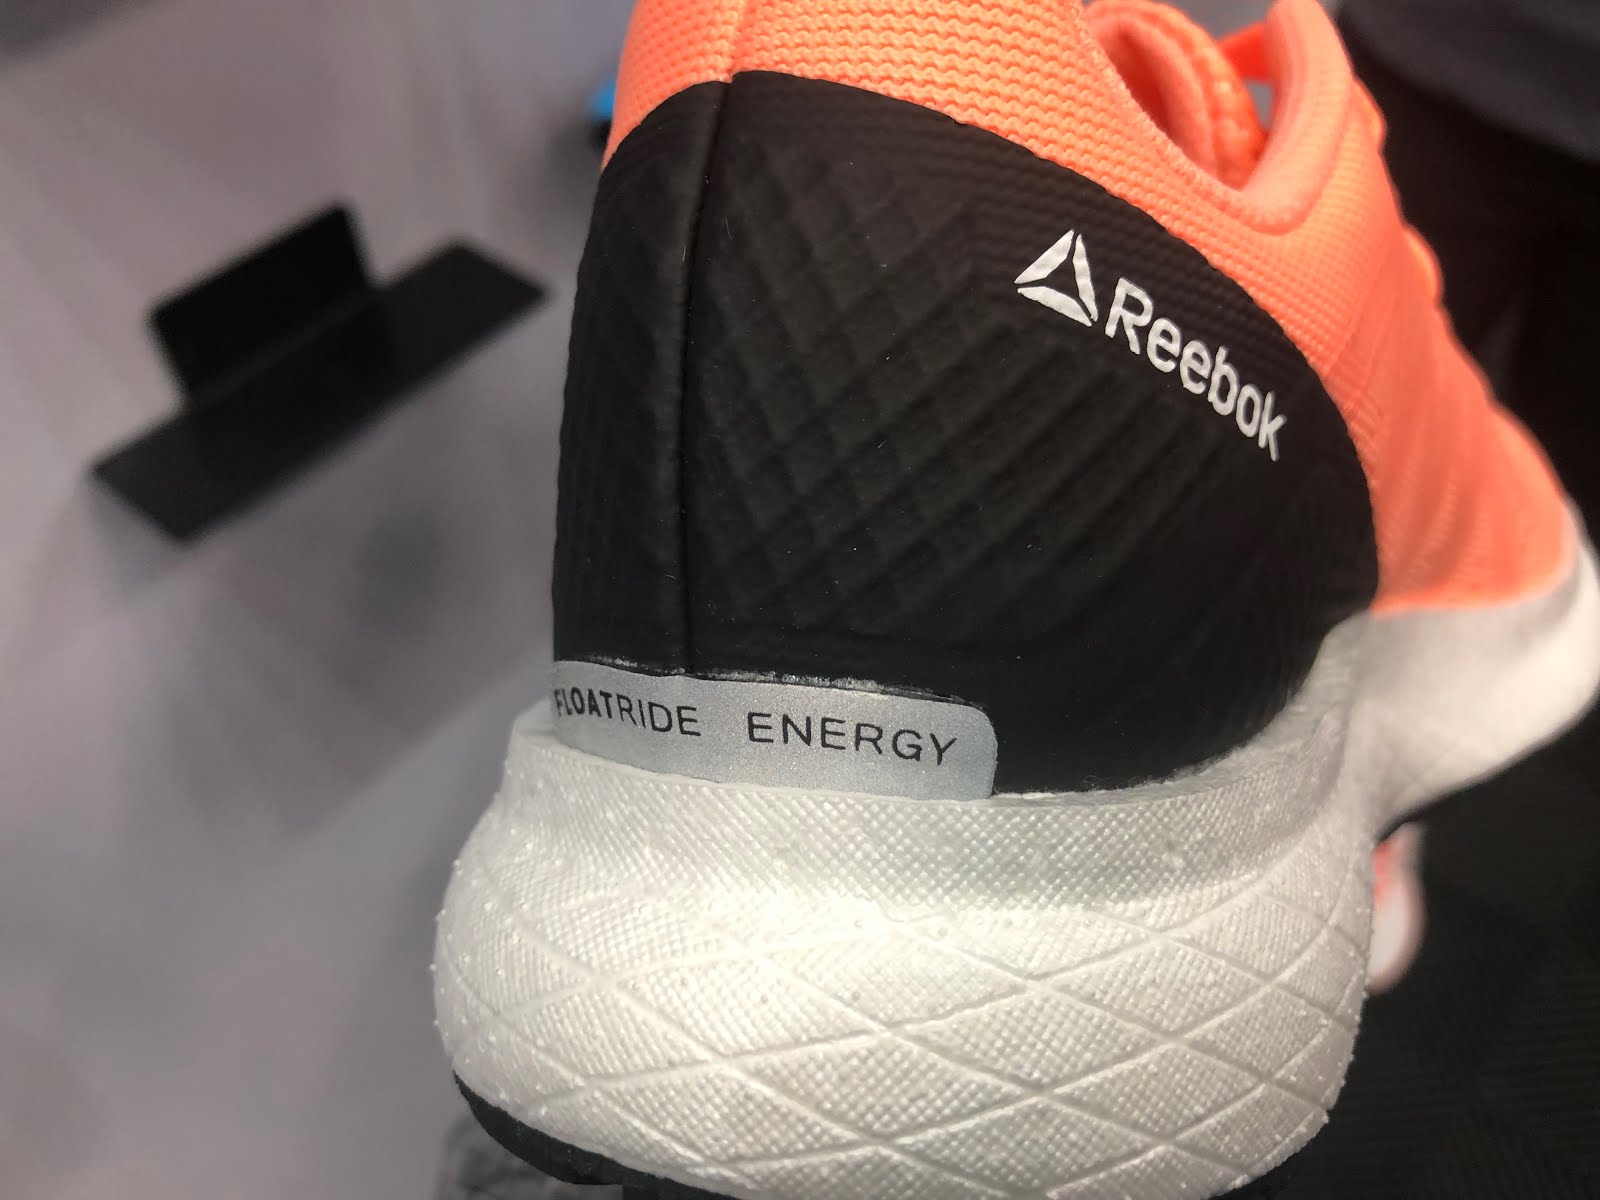 Road Trail Run: Reebok 2019 Previews: New Forever Floatride Energy! Updates: Ride Run 2.0, Grasse Road 2 ST, Harmony Road 3